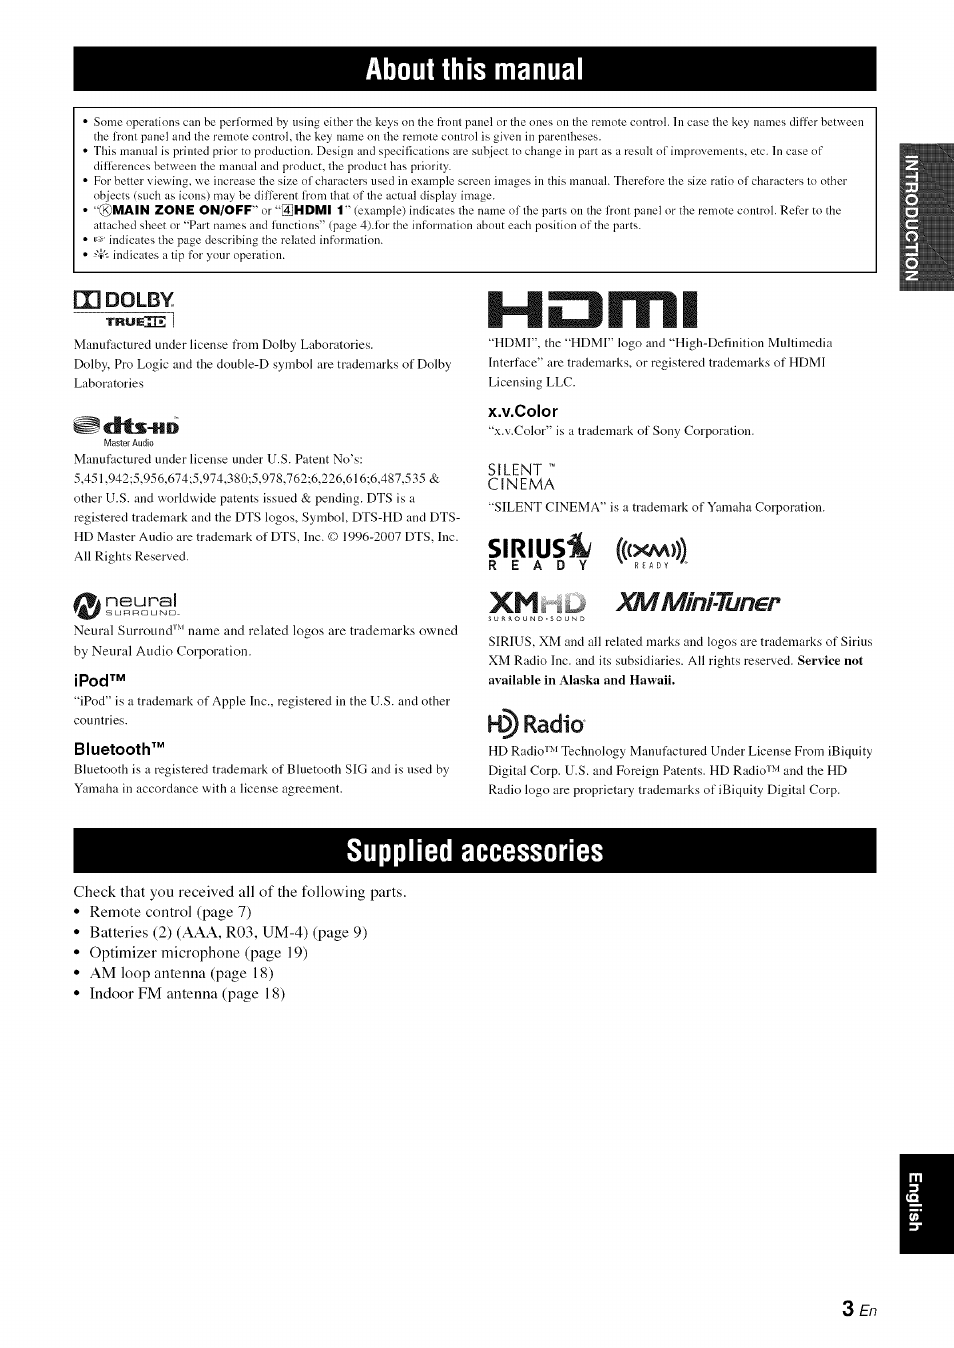 About this manual, X.v.color, Ipod | Yamaha RX-V1065 User Manual | Page